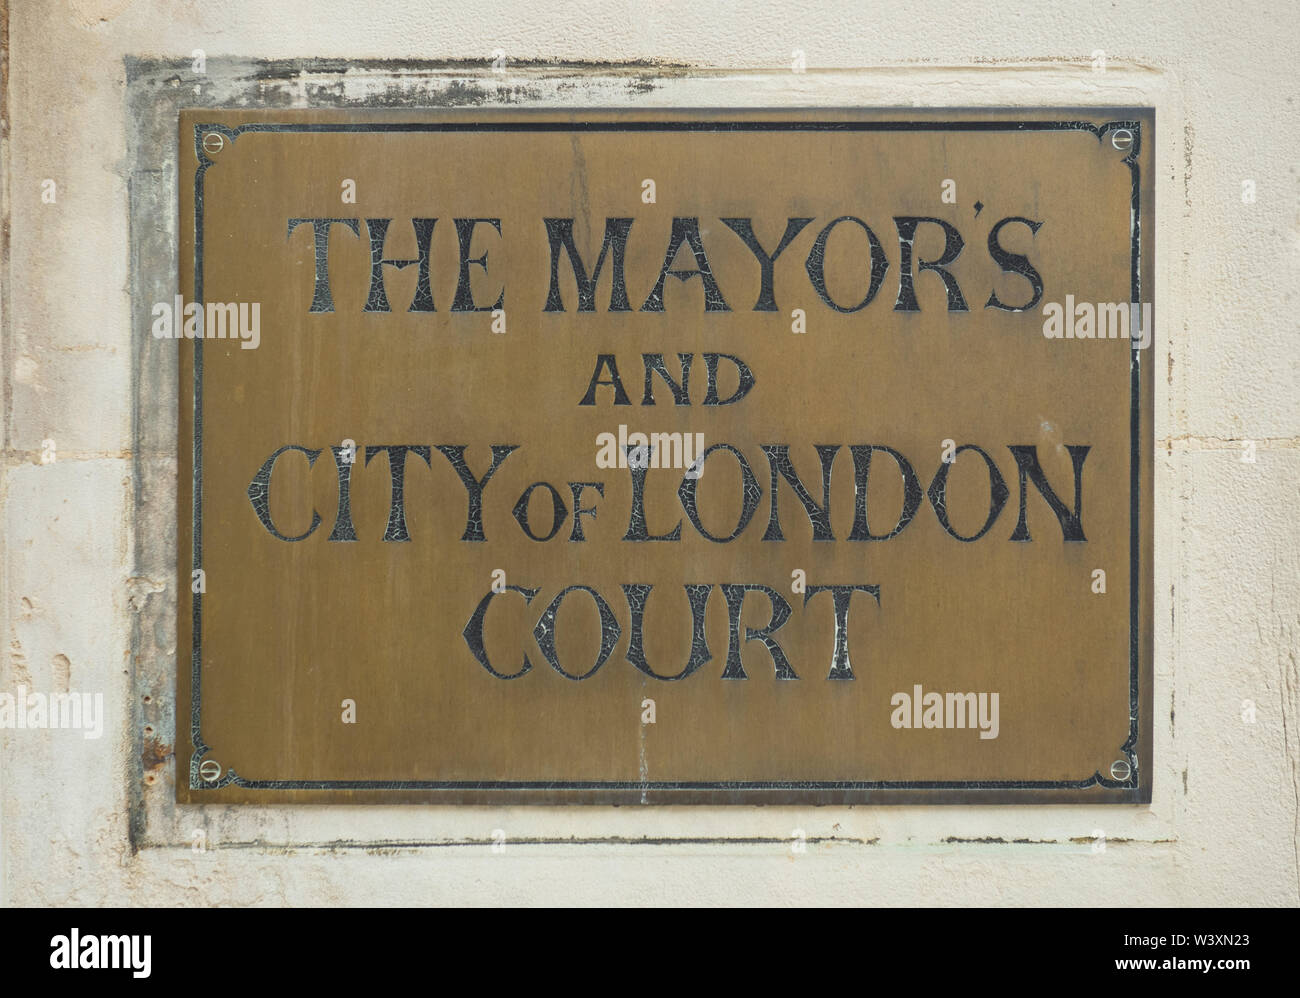 The Mayor's and City of London Court where Darren Grimes is to appeal against a &pound;20,000 fine imposed by the Electoral Commission. The founder of pro-Brexit campaign group BeLeave was fined after allegedly breaching spending rules during the EU referendum campaign. Stock Photo